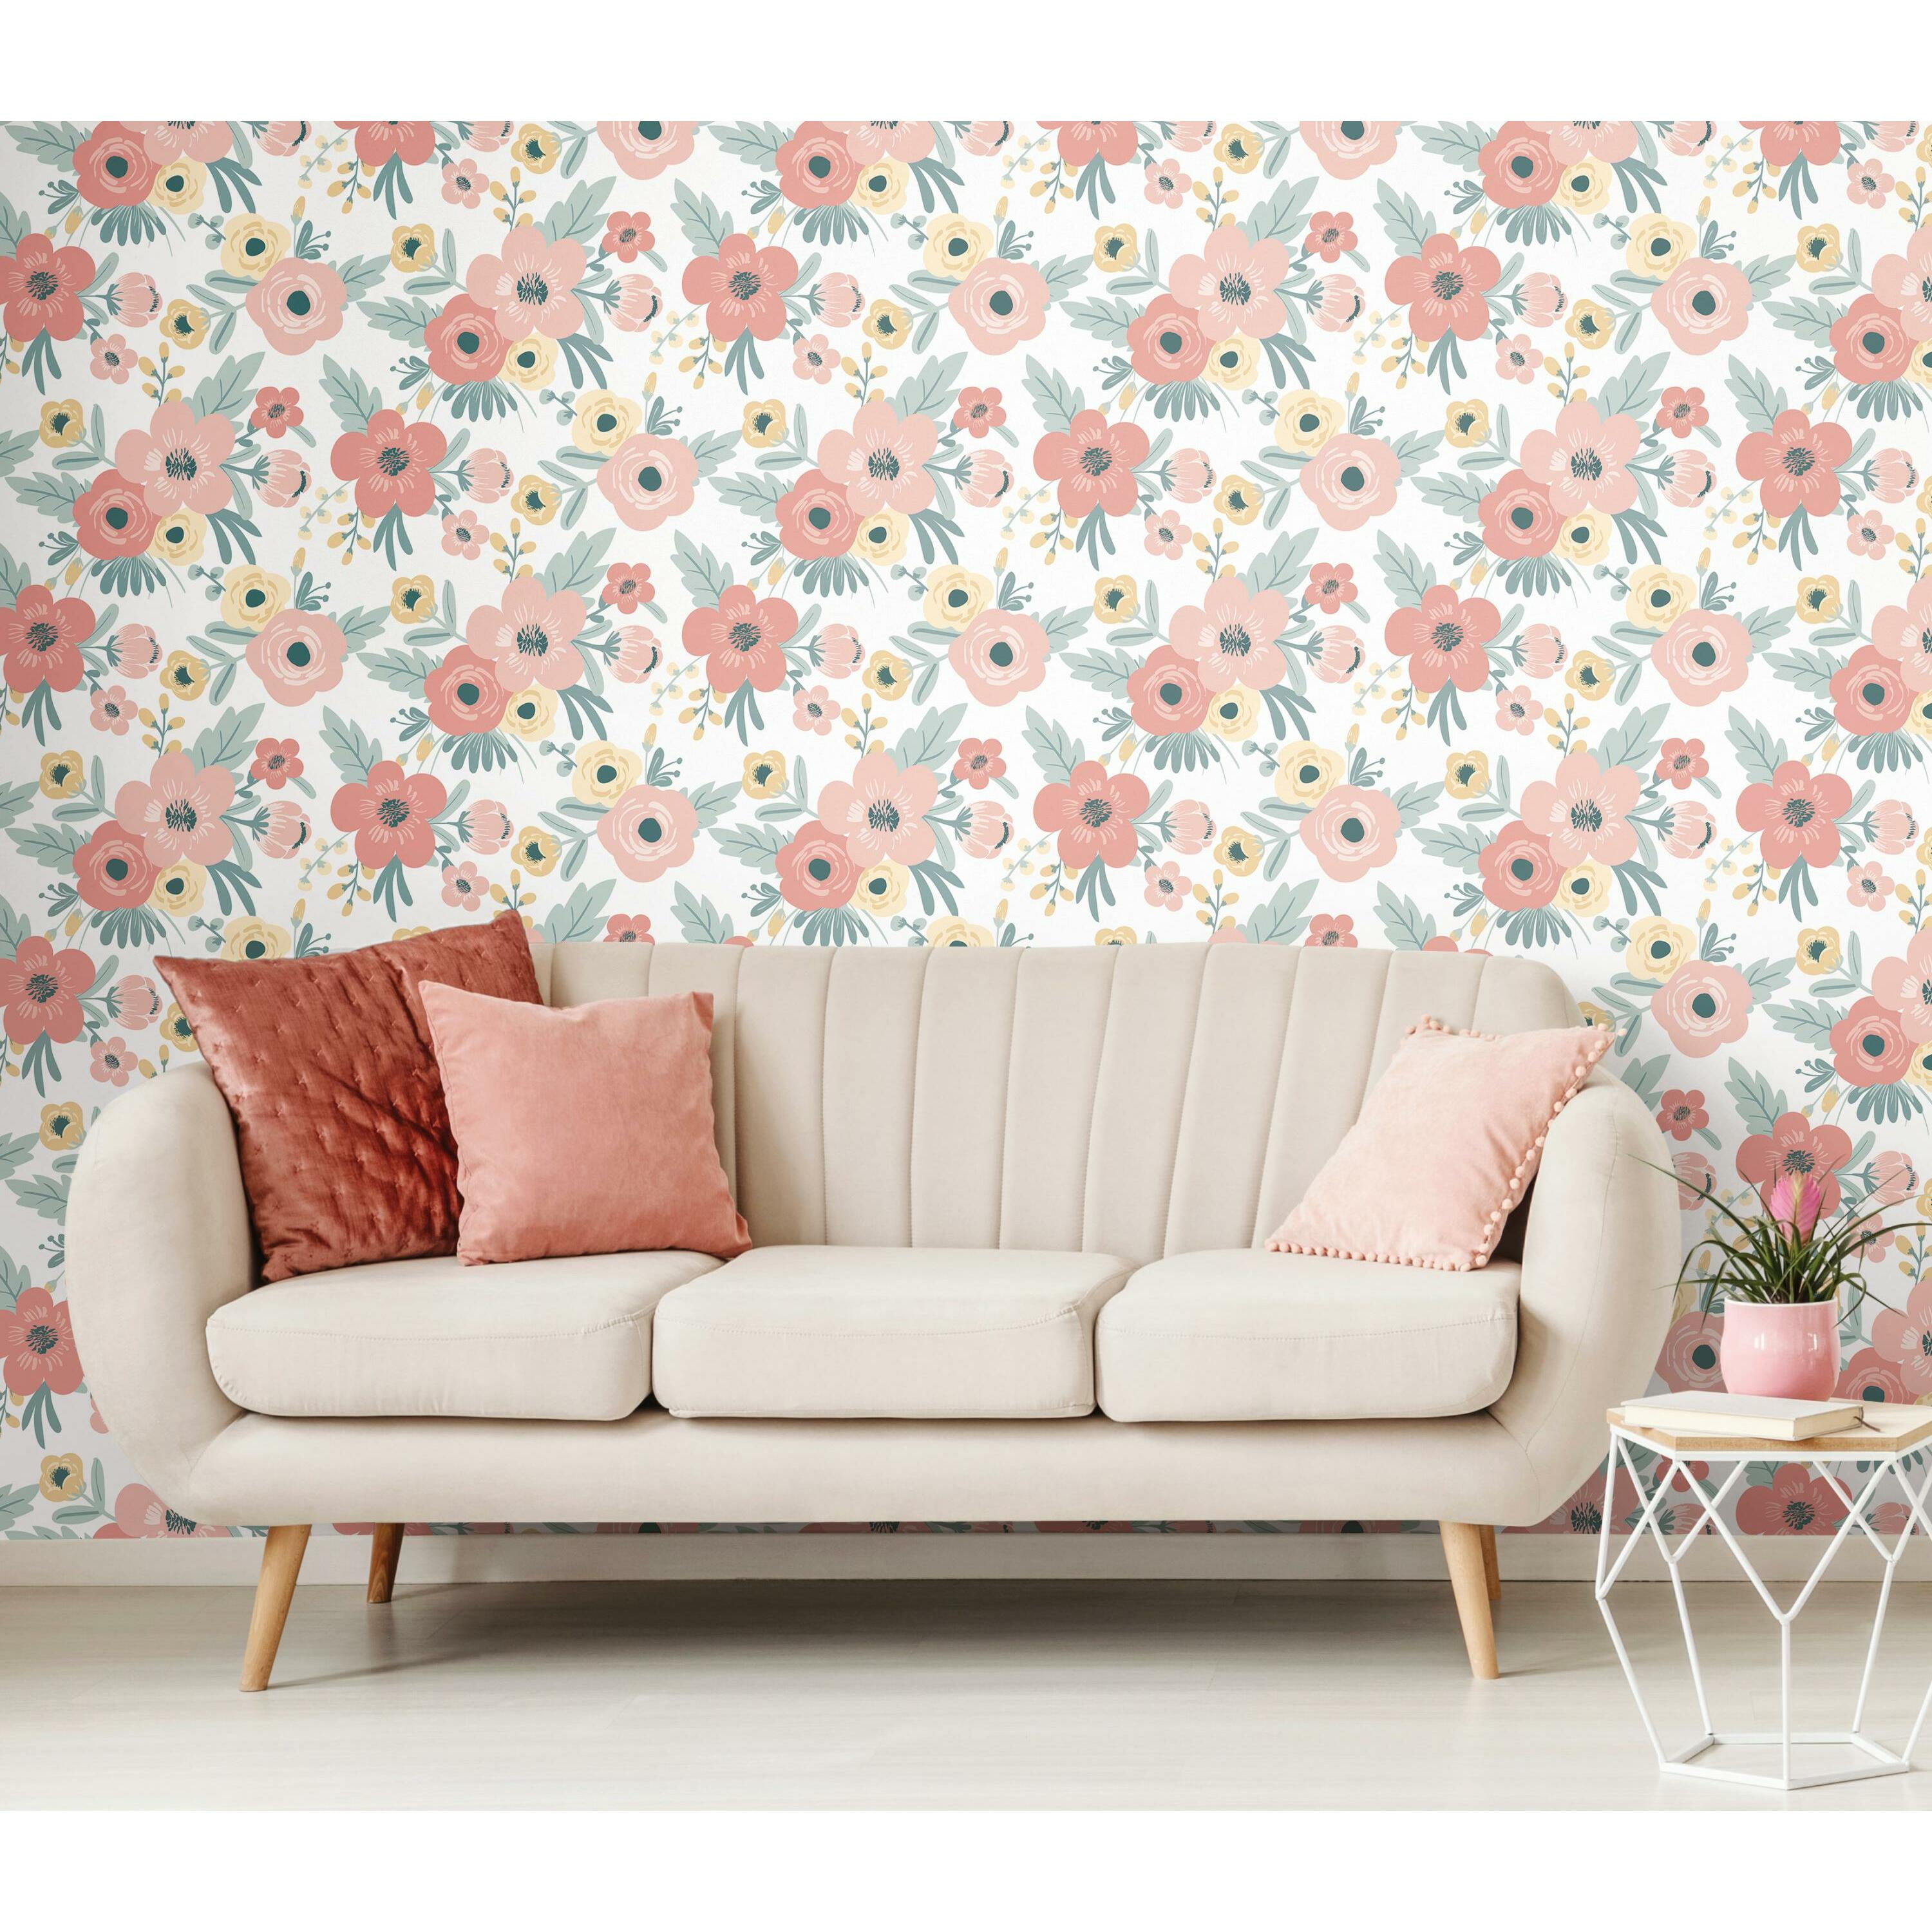 RoomMates Pink Poppy Floral Peel and Stick Wallpaper - Walmart.com